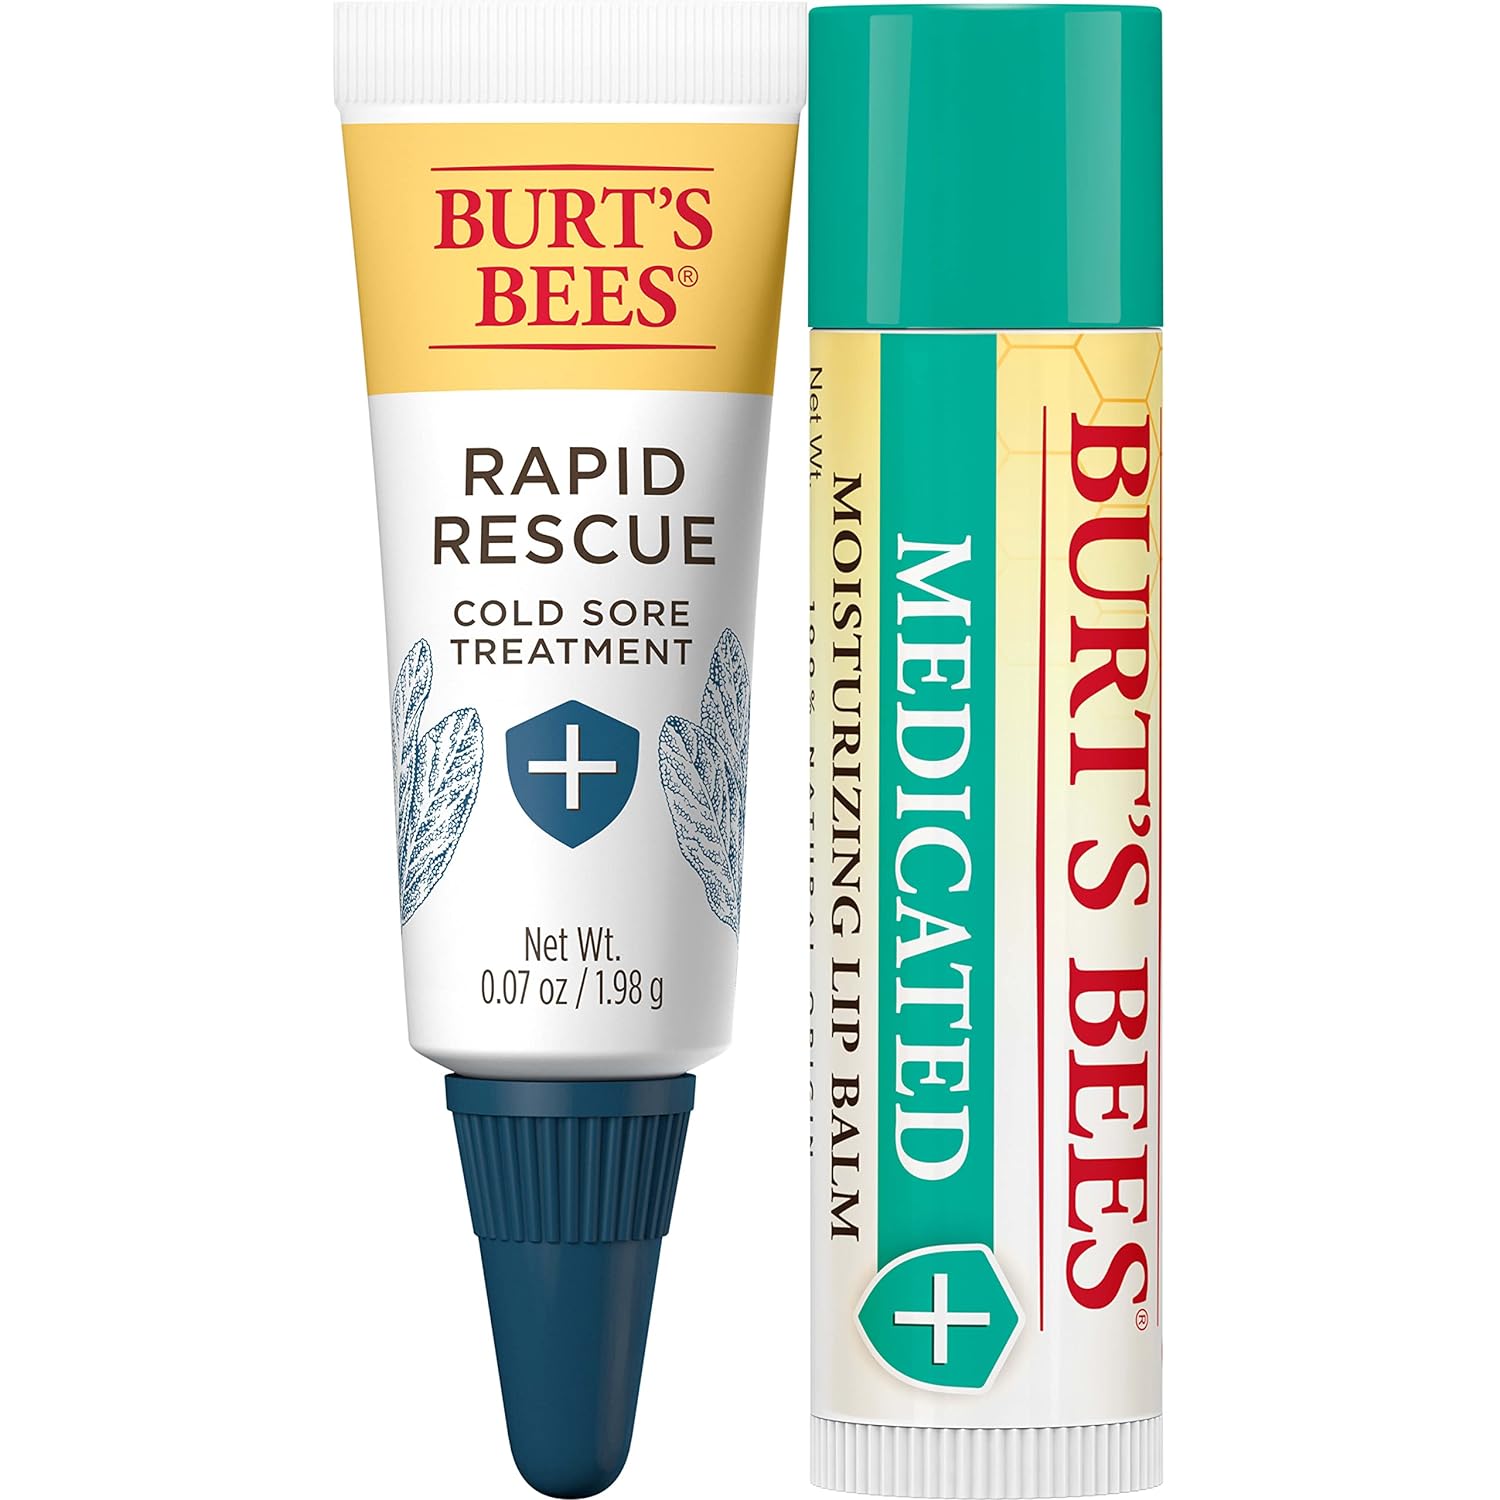 Burt's Bees Cold Sore Treatment and Medicated Lip Balm, With Menthol and Eucalyptus Oil, Natural Origin Skincare Products, 2 Tubes, 0.07 oz./0.15 oz